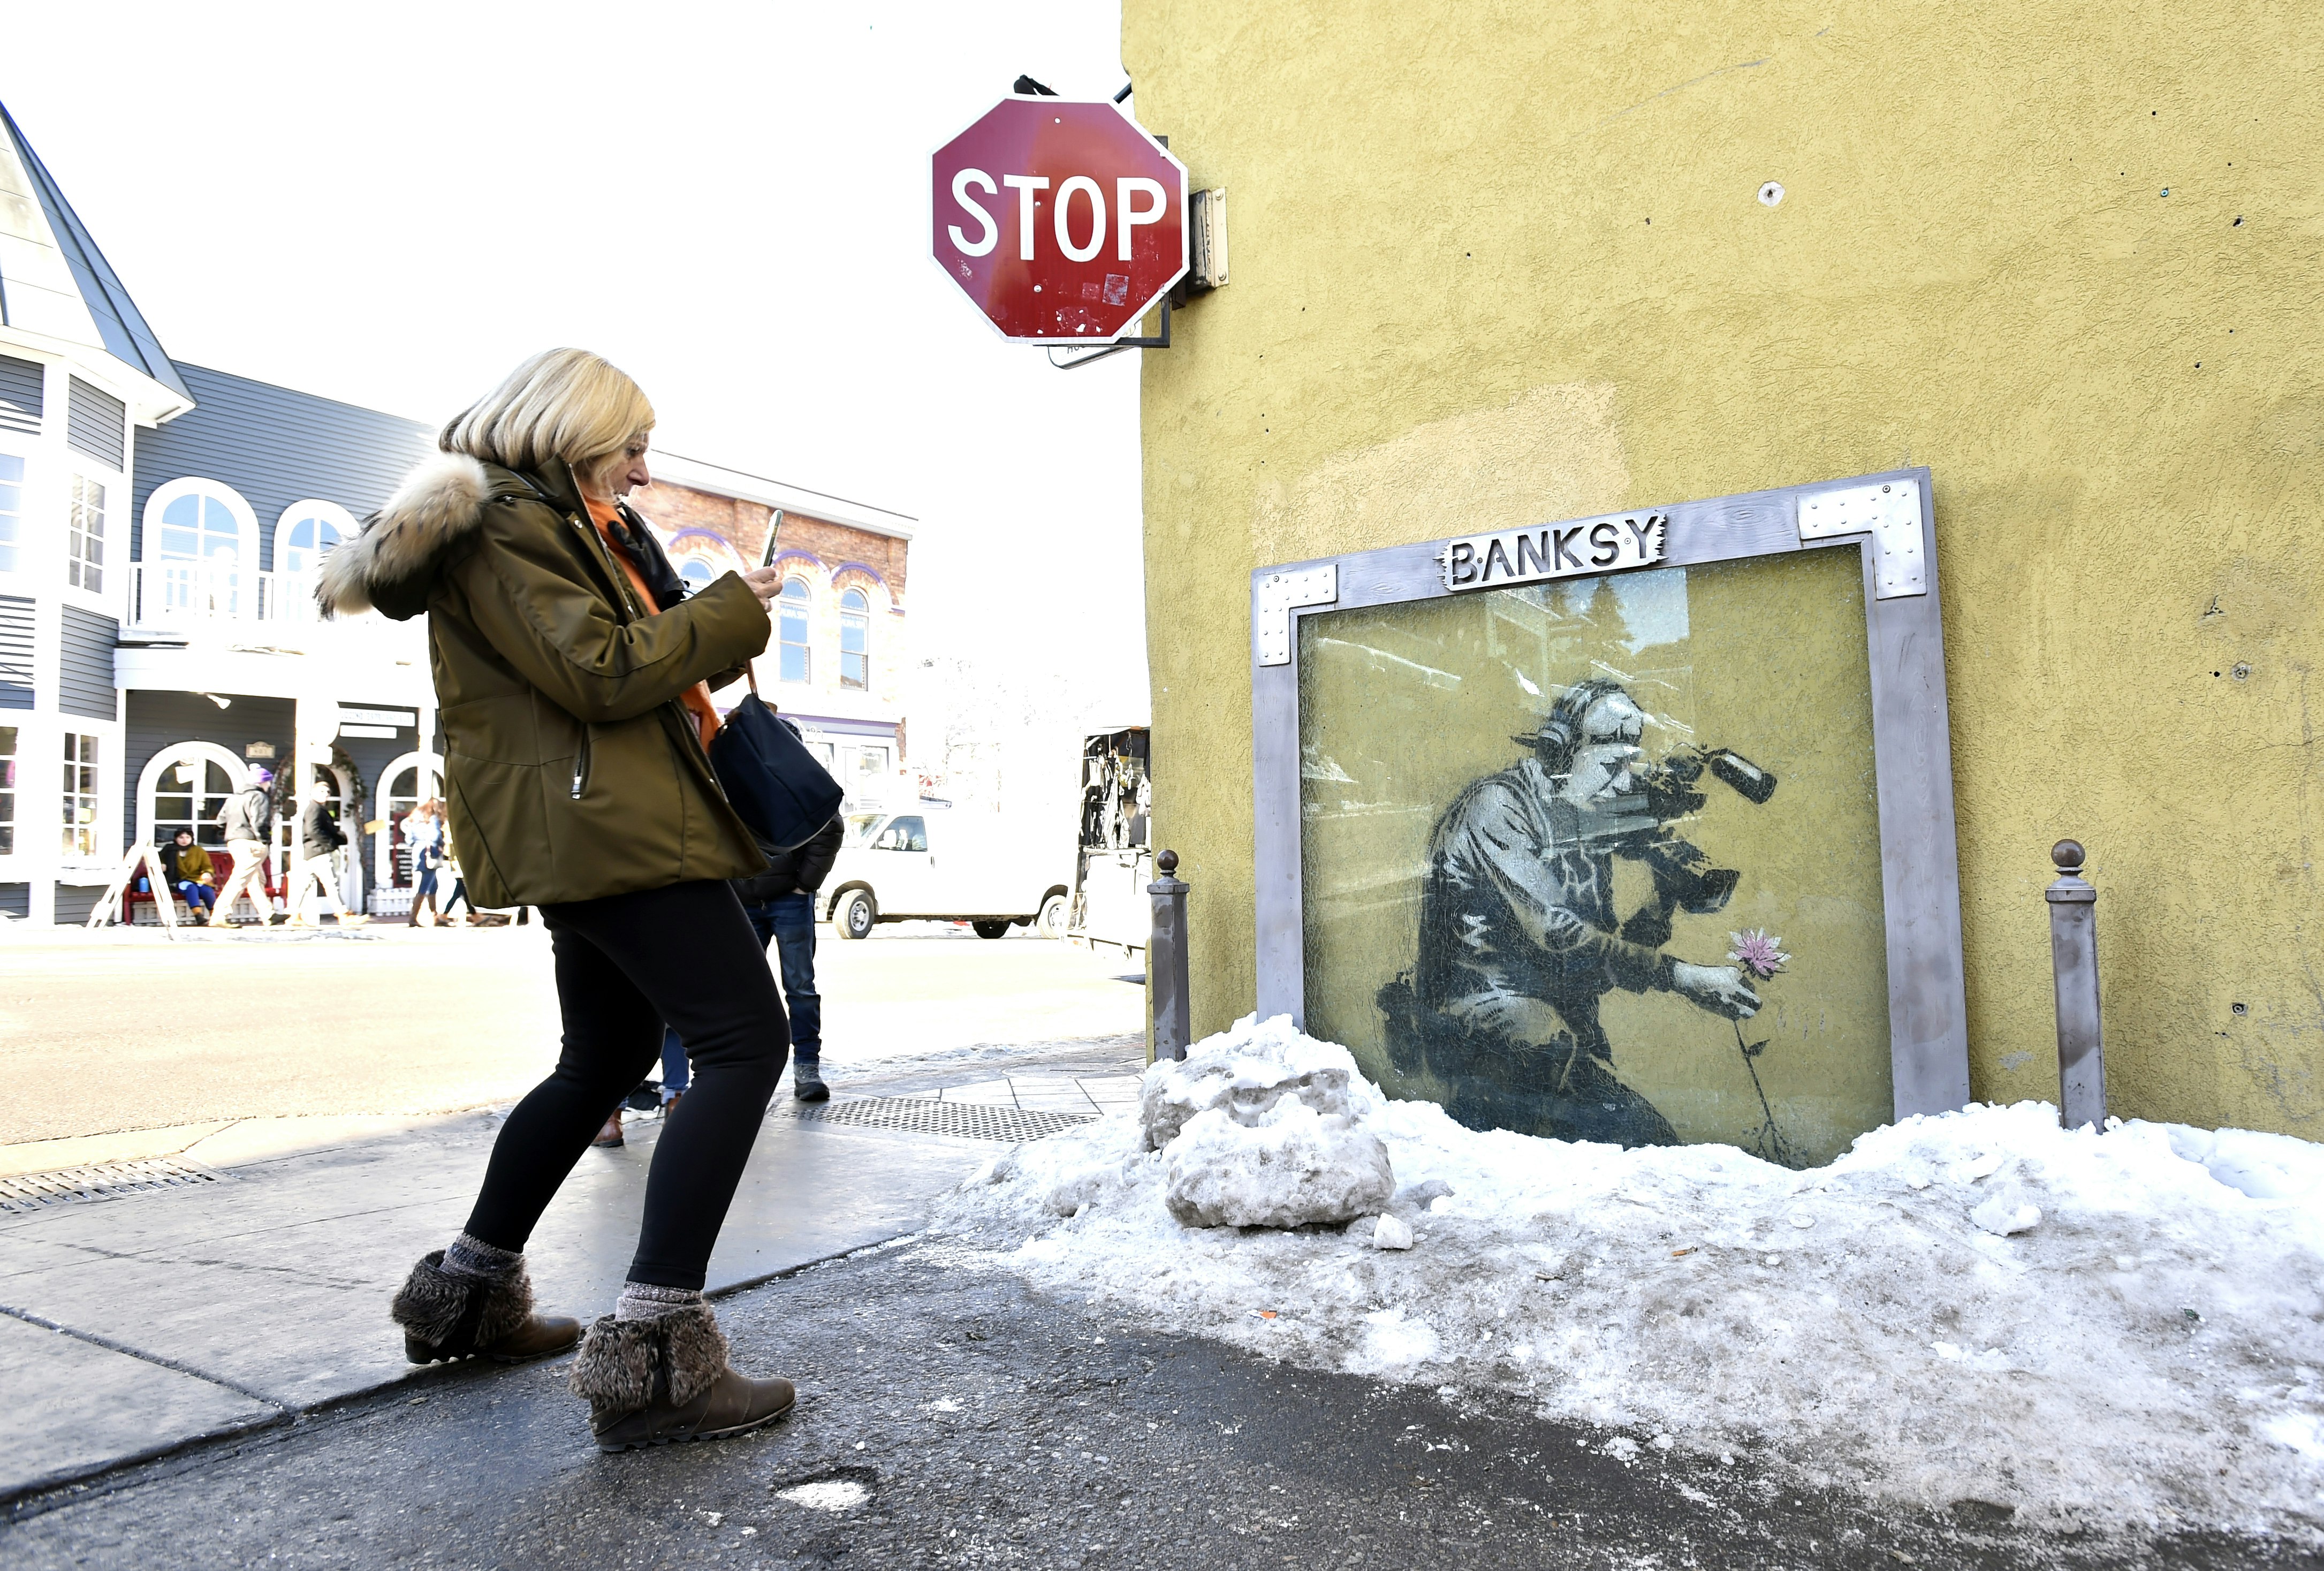 A woman in wedge ankle boots and a olive parka with blond hair leans back and bends her knees as she snaps a photo of a Banksy mural in Park City